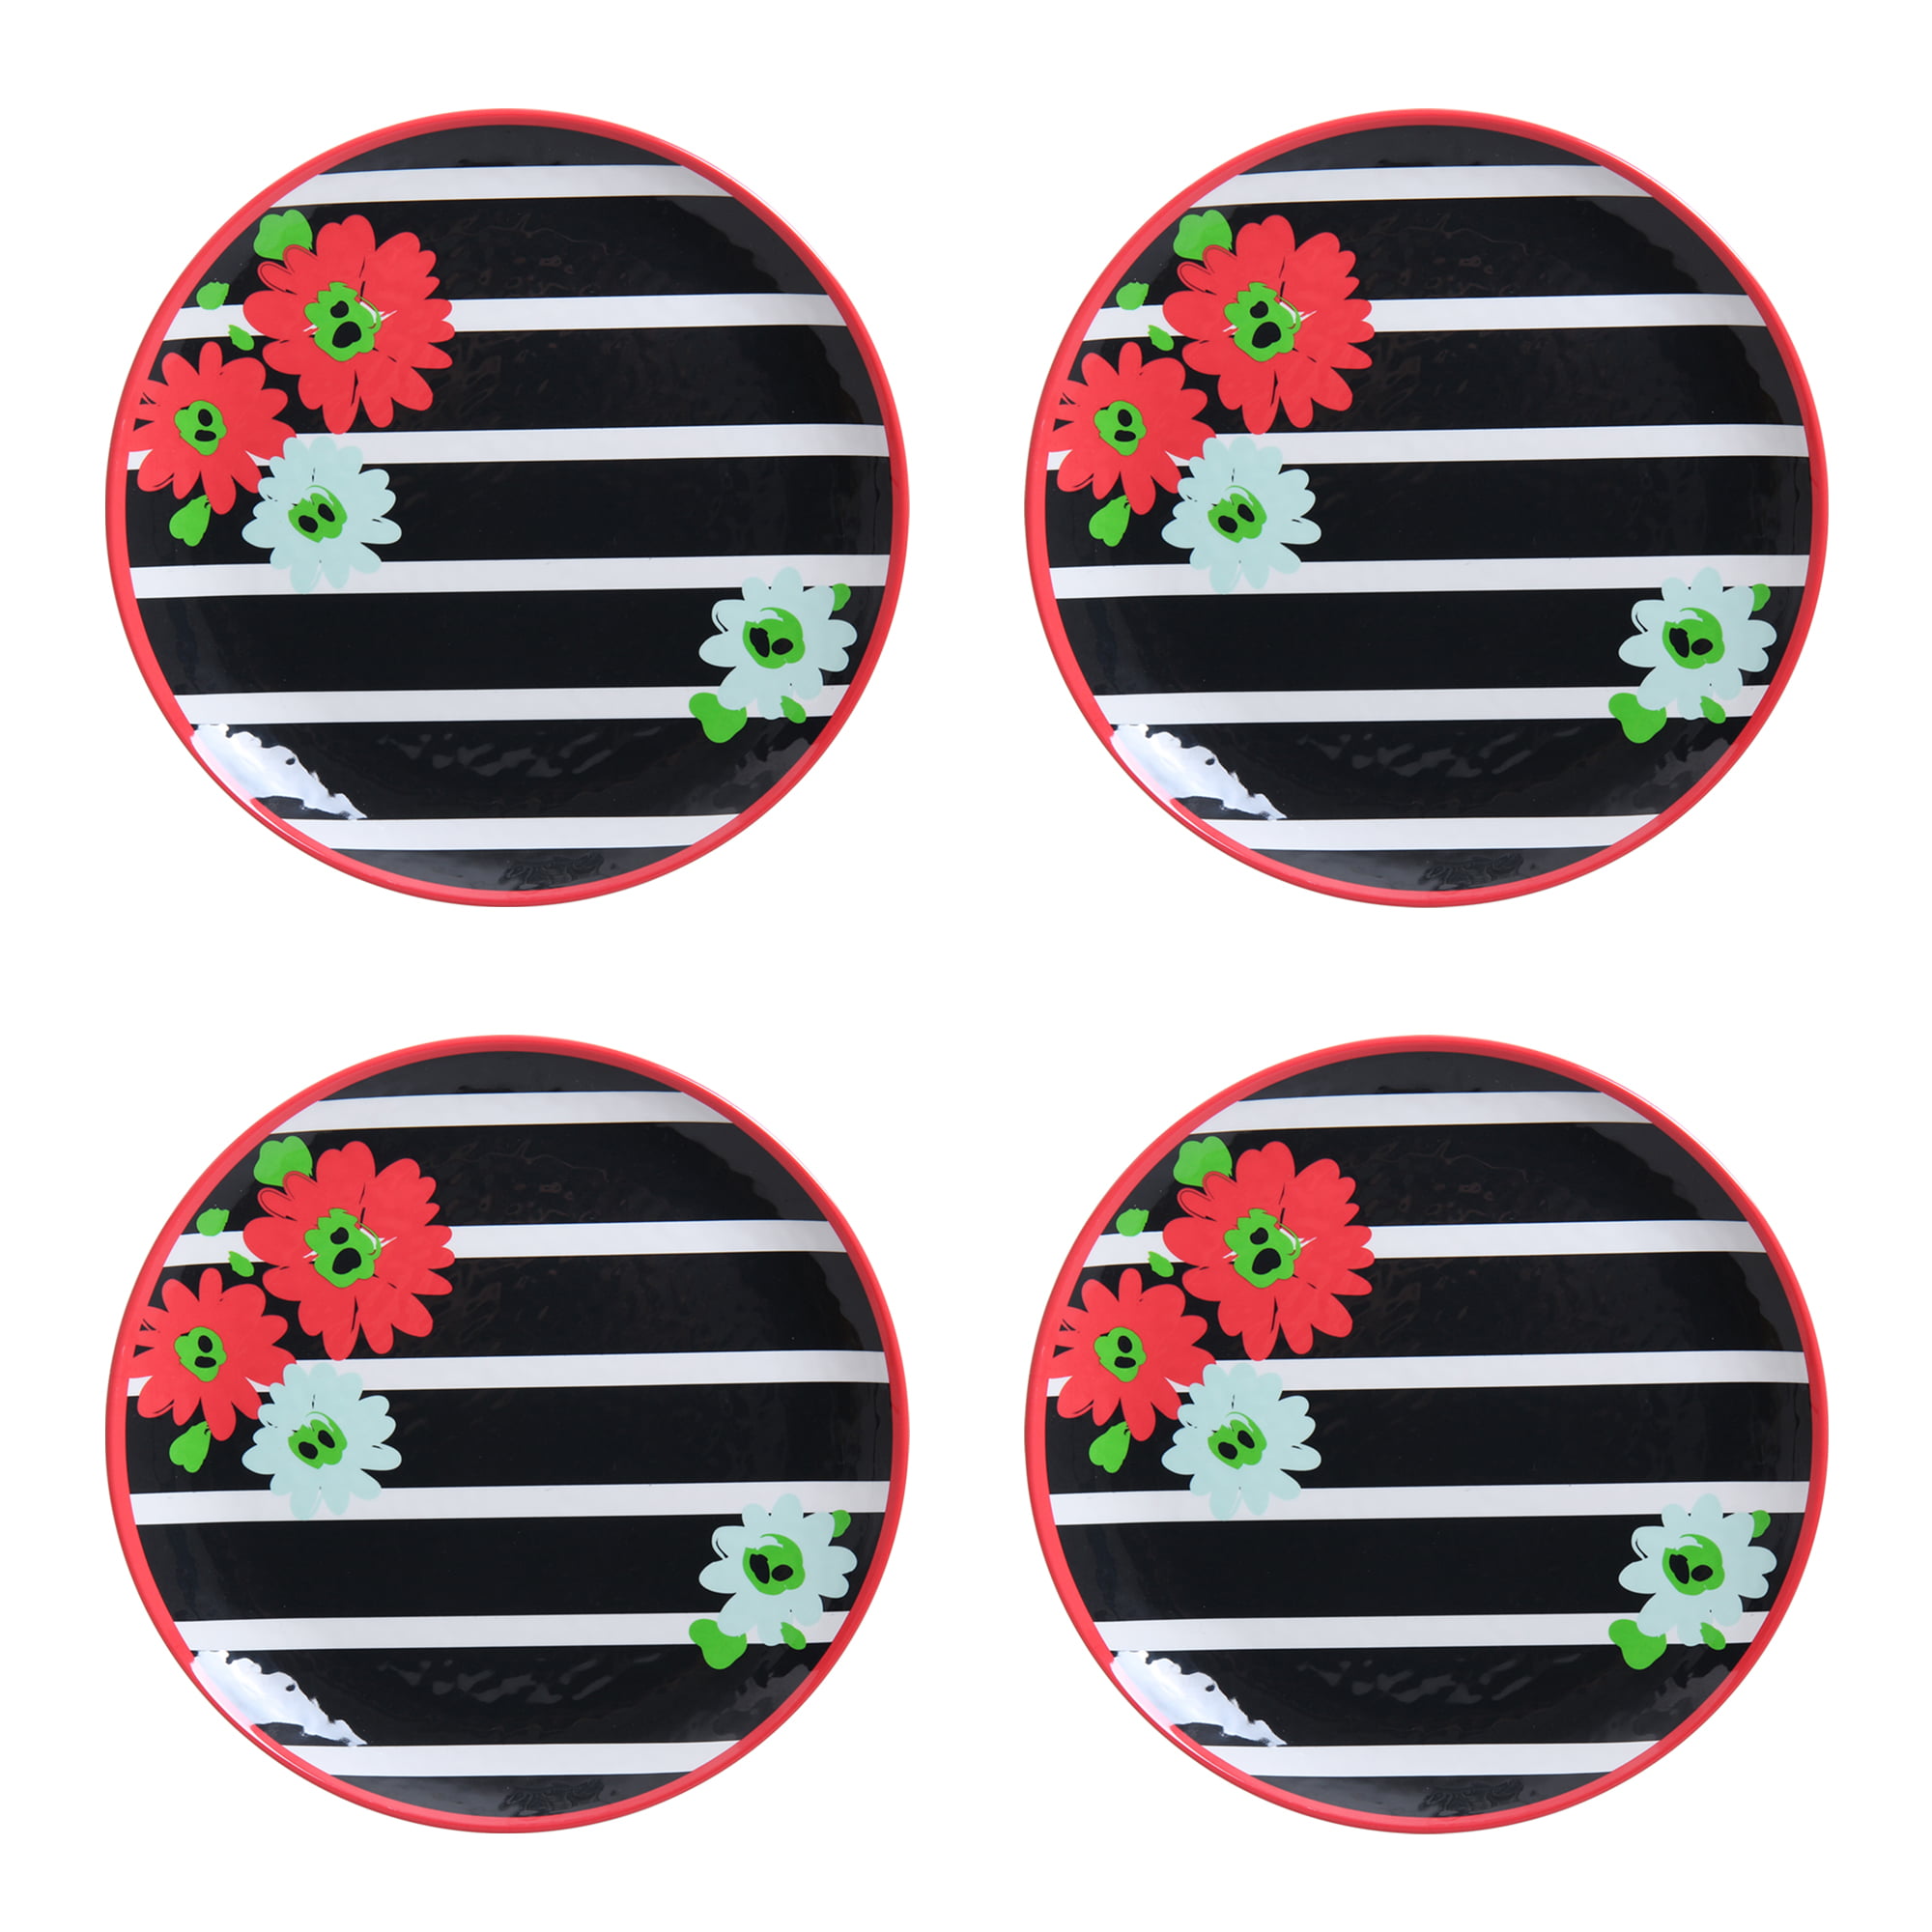 Details about   Summer Floral Red Poppy Flower Melamine Indoor Outdoor Plates Set Of 4 Brand New 